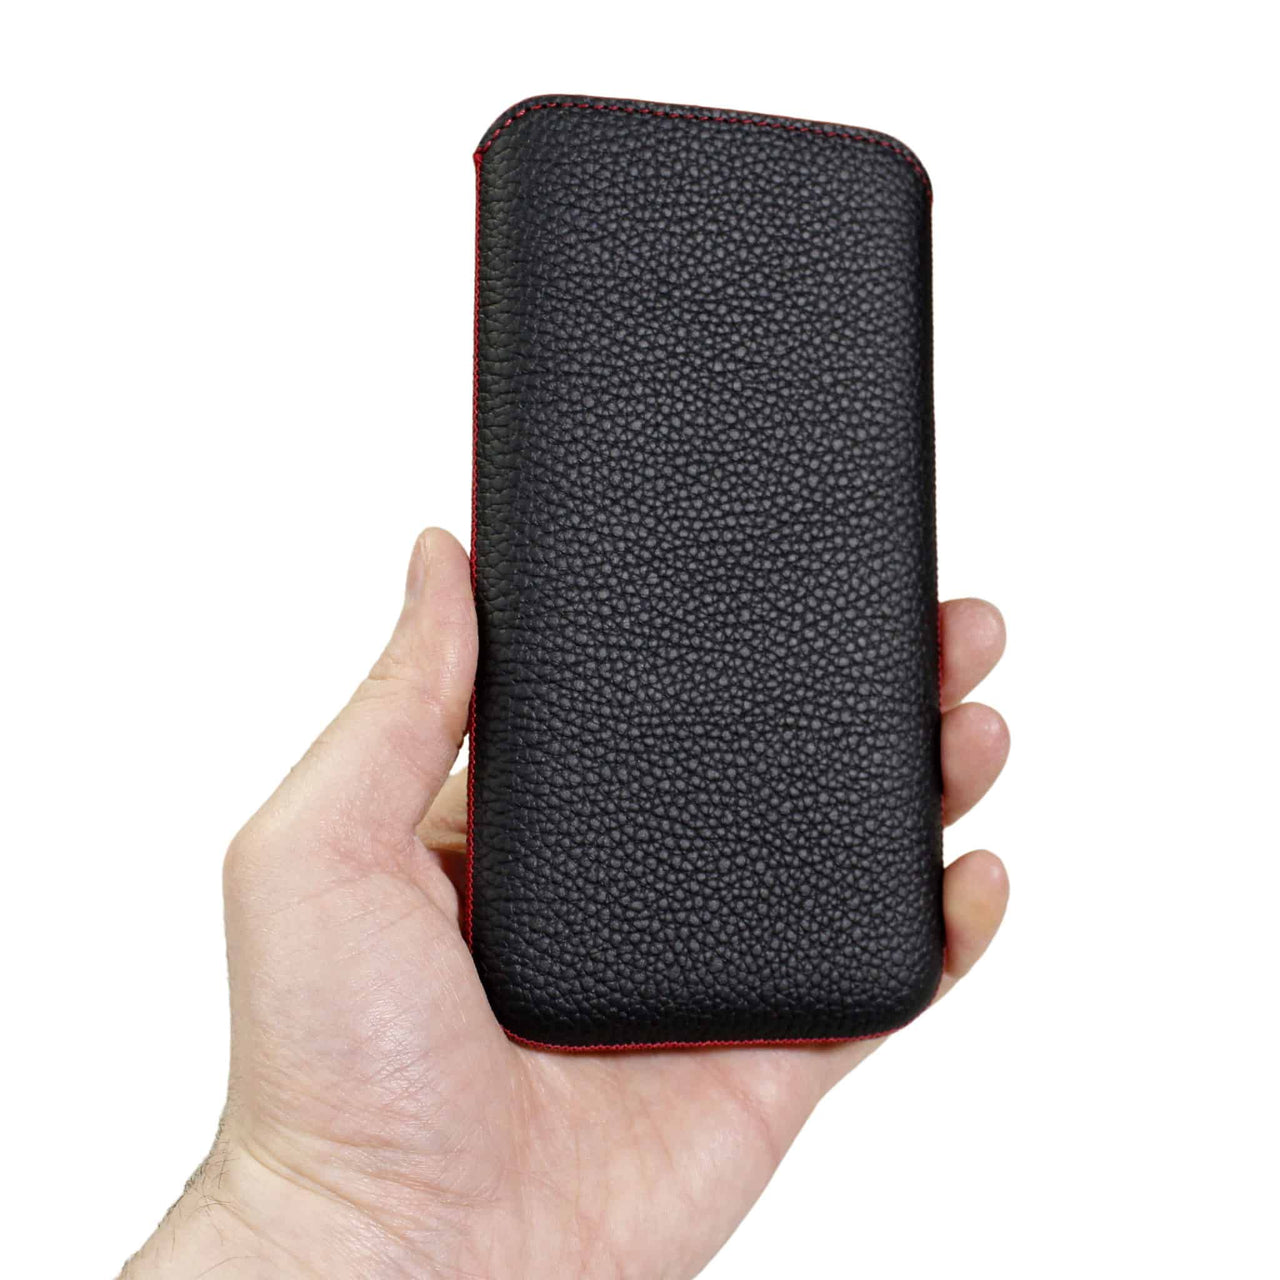 iPhone 12 / 12 Pro Genuine Leather Pouch Sleeve Case | Artisanpouch